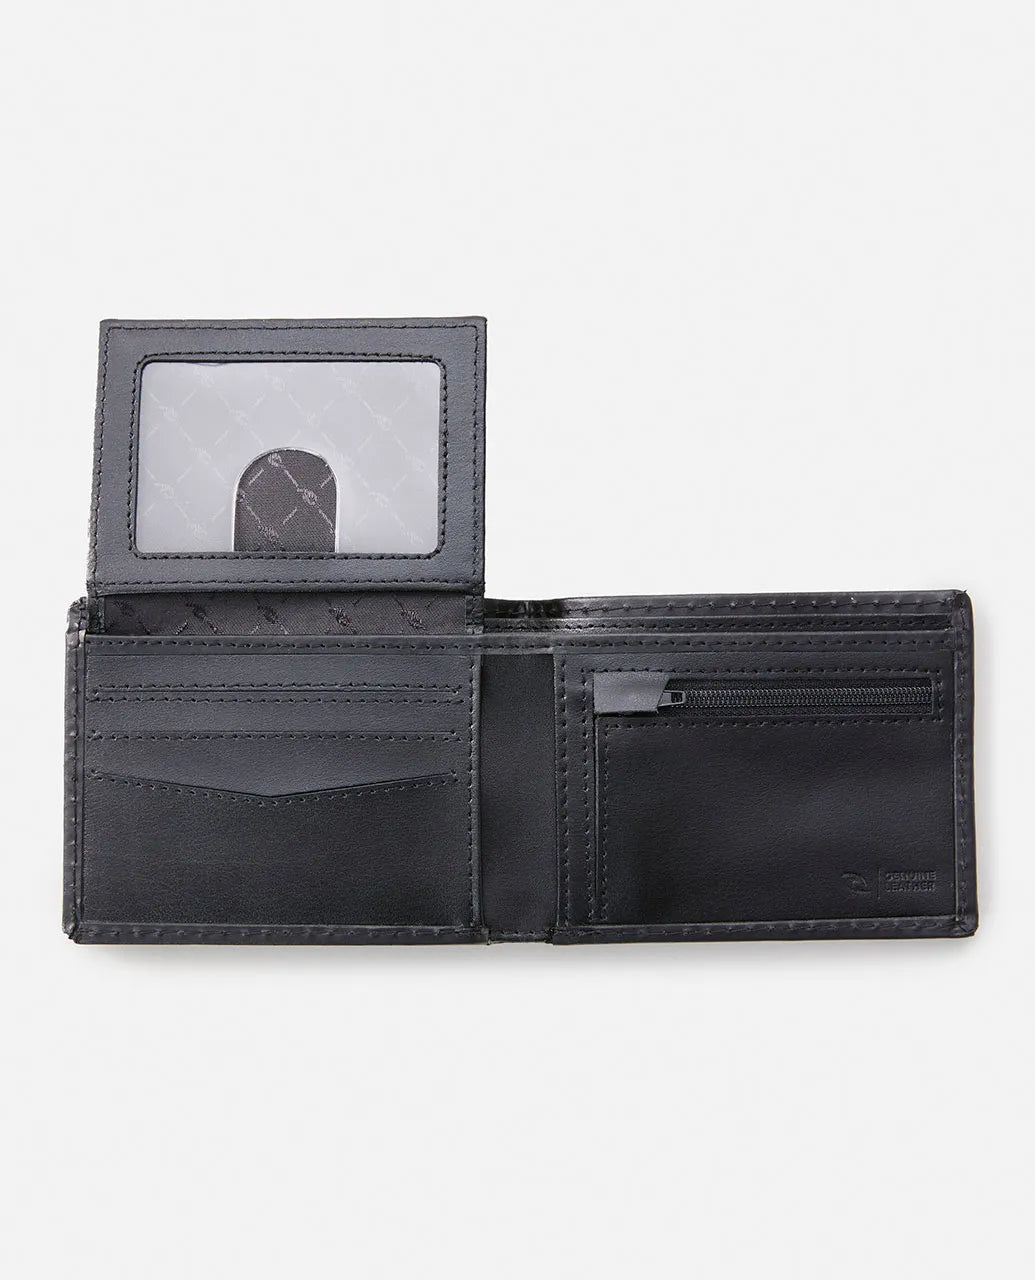 RIP CURL EXECUFOLD RFID ALL DAY WALLET BLACK